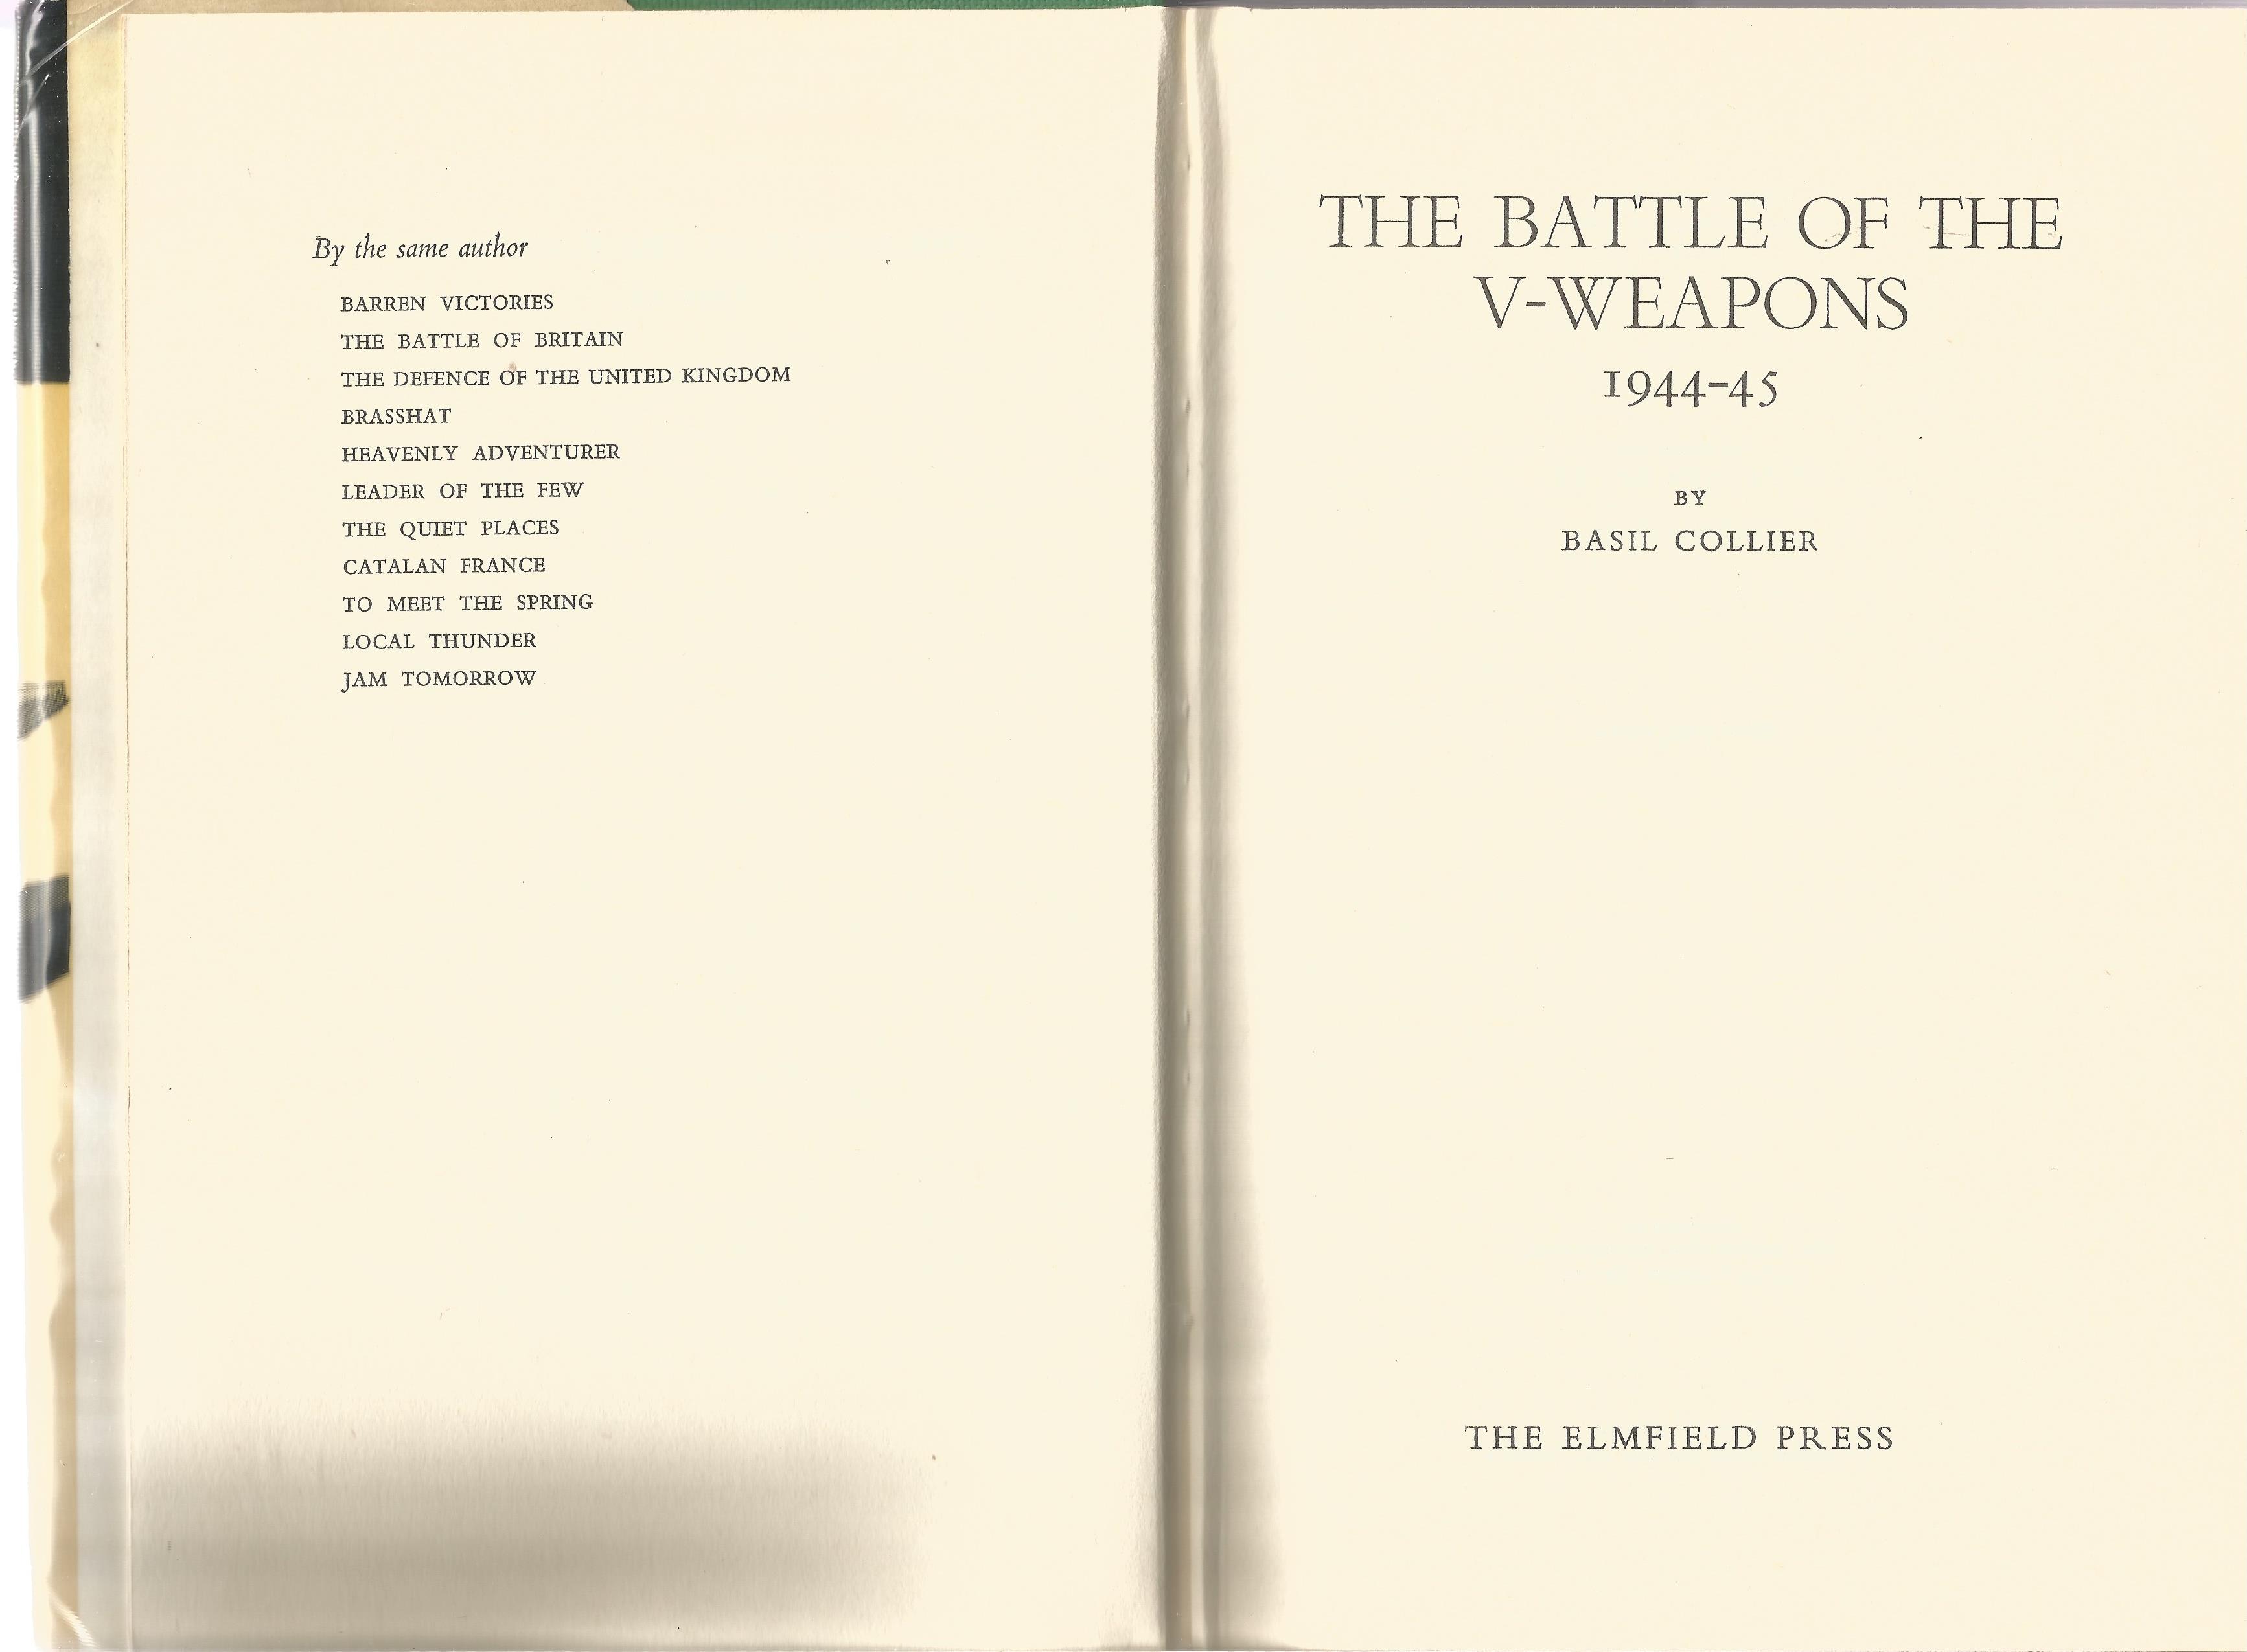 Basil Collier. The Battle Of The V-Weapons 1944-45. A WW2 hardback book. A Classic, Detailed - Image 2 of 3